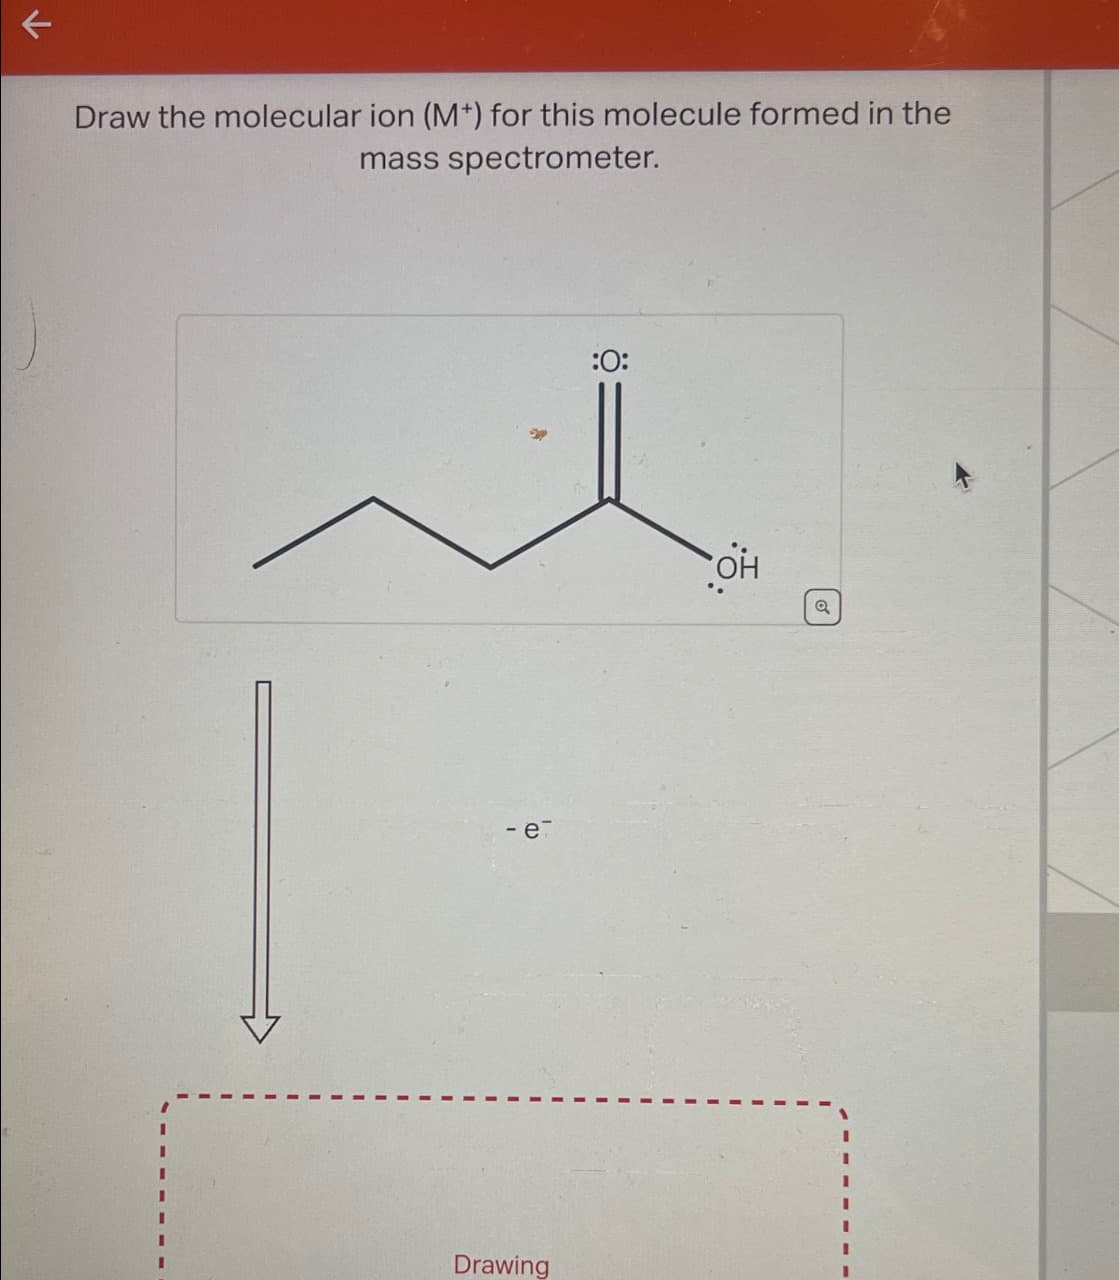 Draw the molecular ion (M+) for this molecule formed in the
mass spectrometer.
I
- e-
Drawing
:0:
ОН
Q